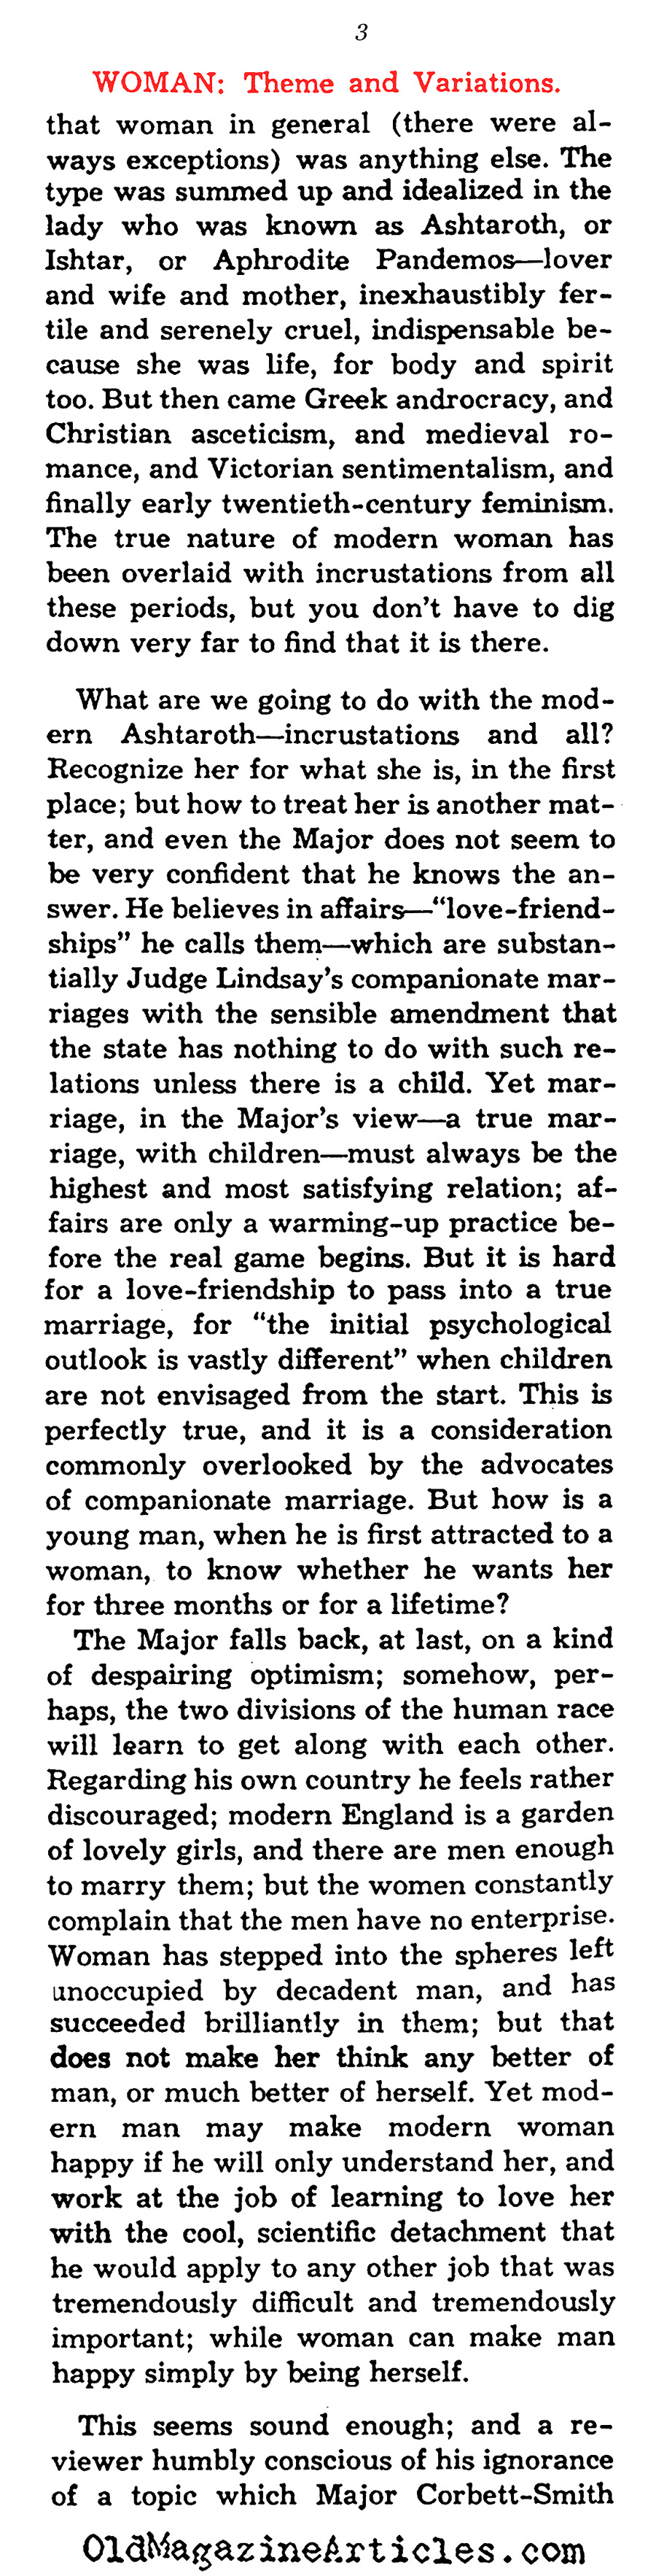 Another Addition to Man's Incomprehension of Woman... (The Saturday Review of Literature, 1932)